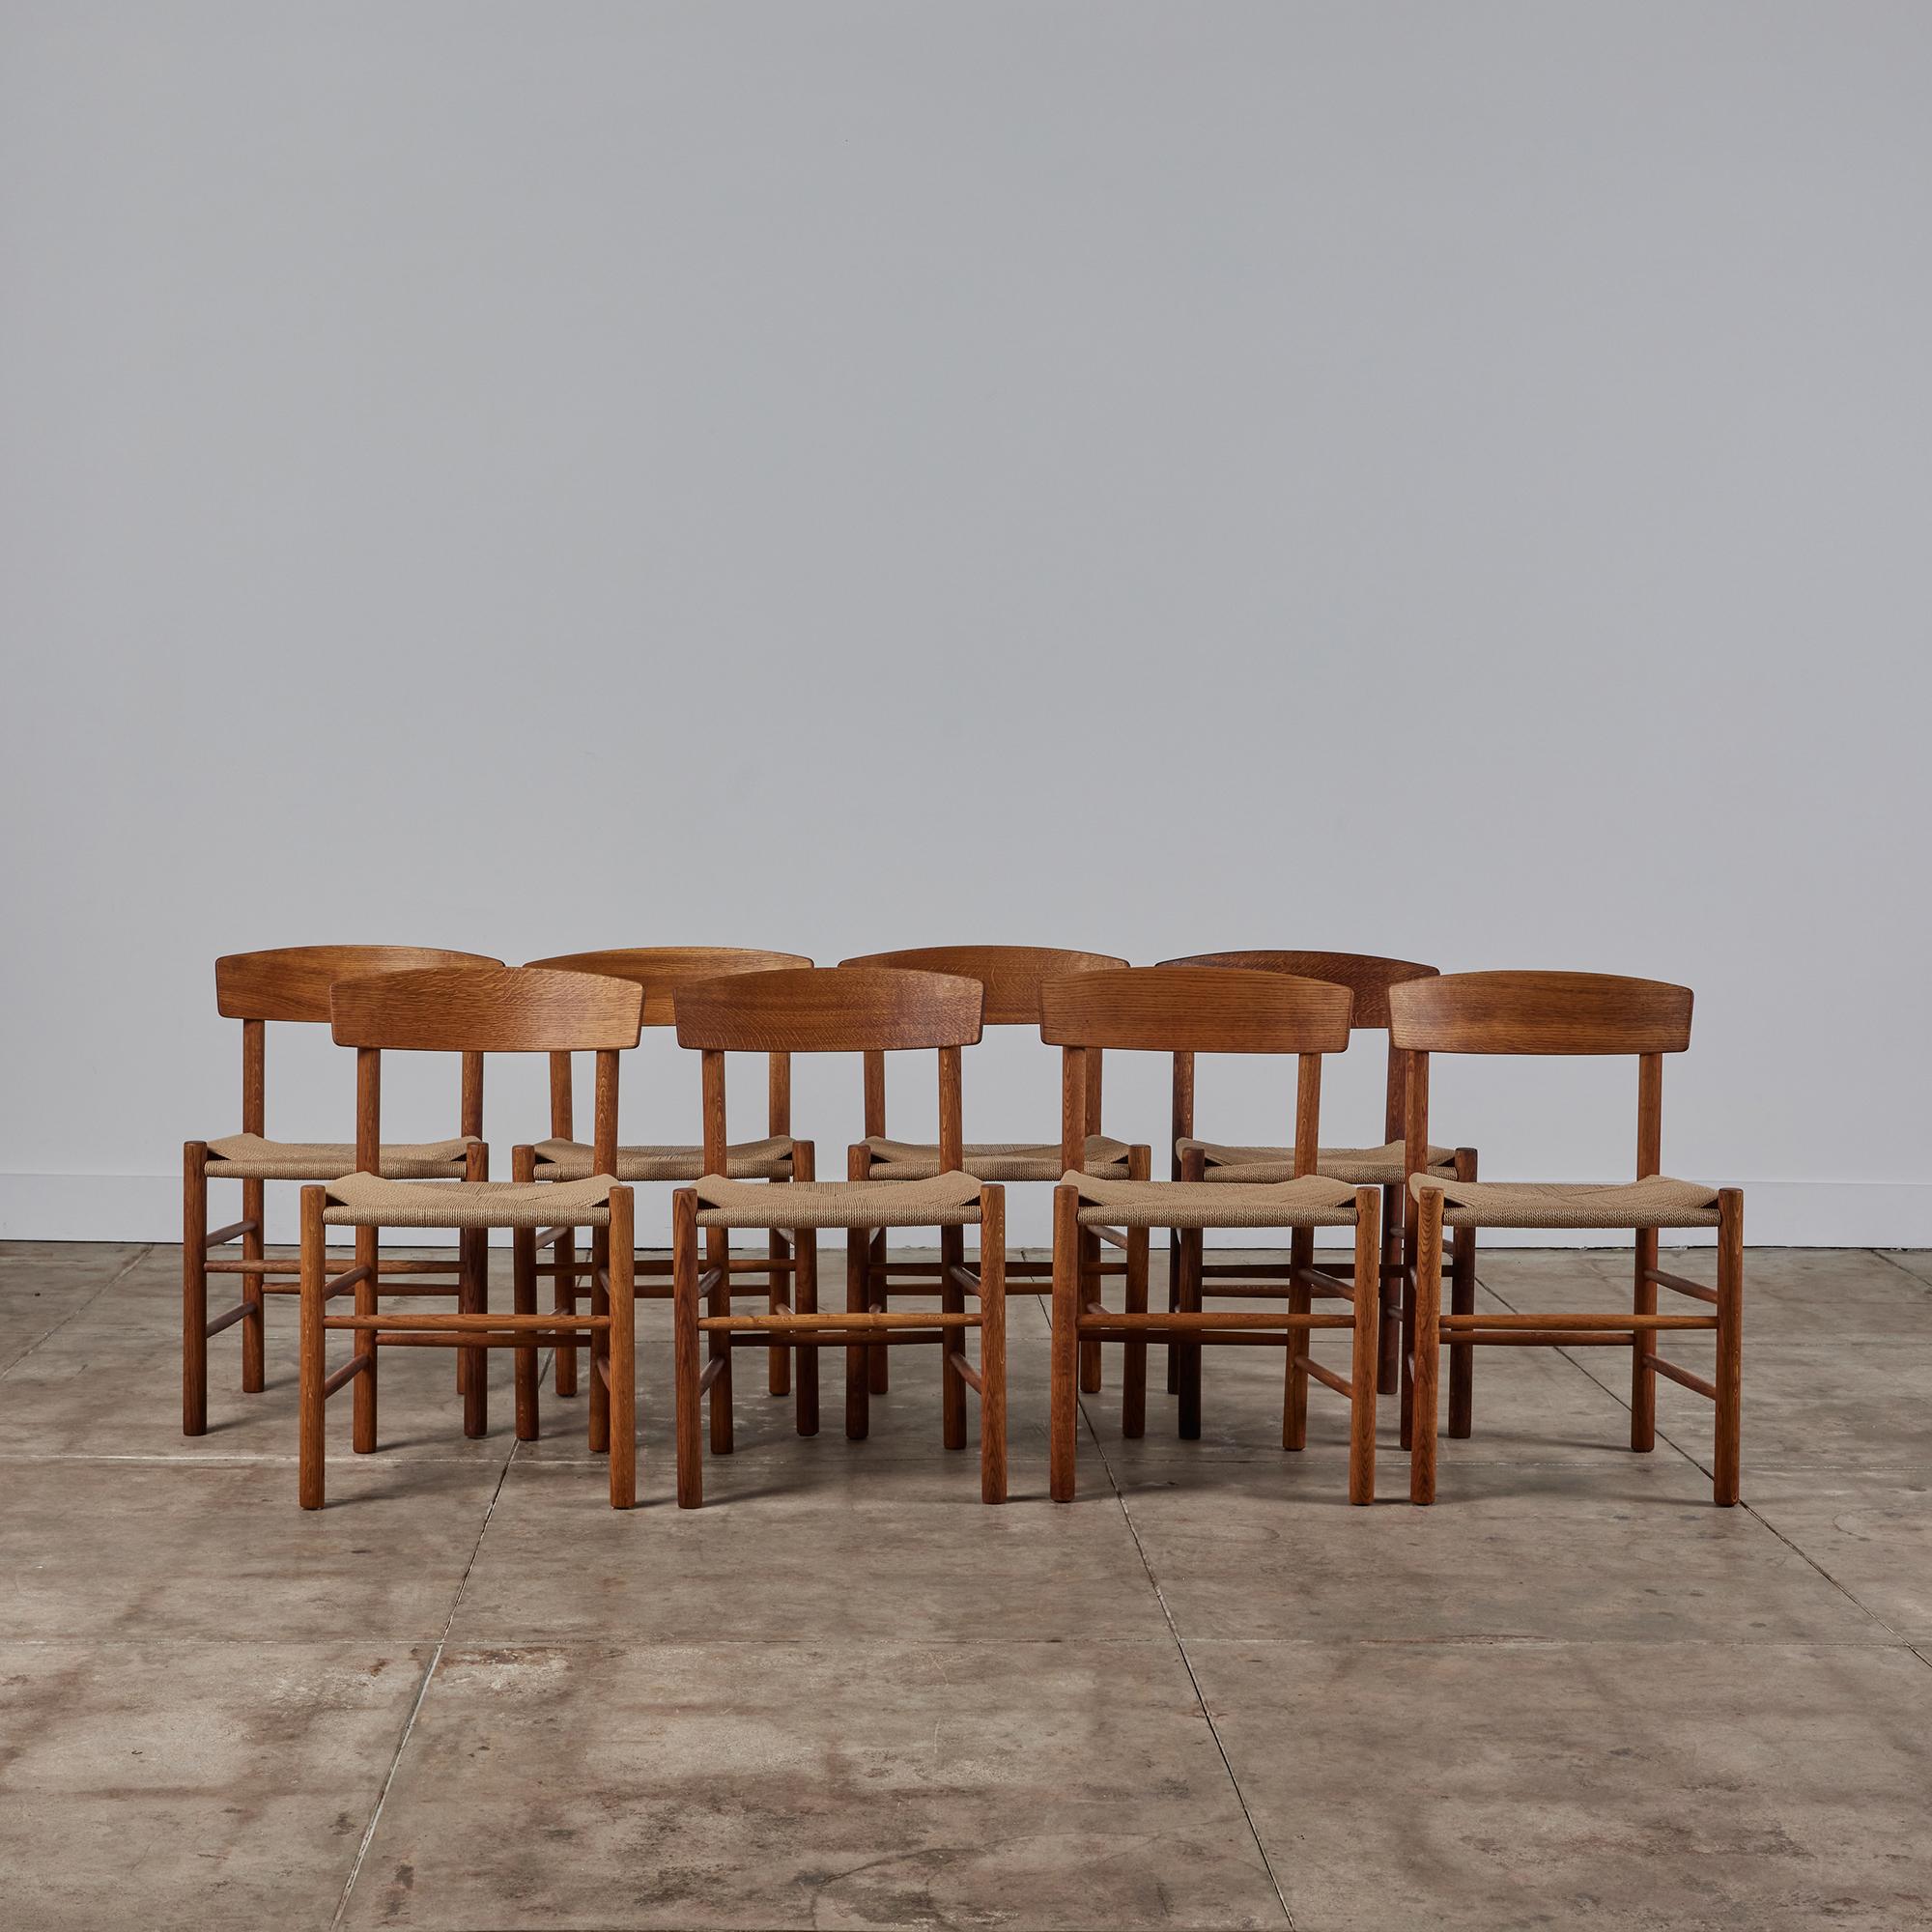 Set of eight dining chairs by Børge Mogensen for FDB Møbler beginning in 1947. The J39 or “People’s Chair,” has a frame of oak dowels, with a wide, curved backrest and a woven seat in Danish paper cord. Contrasting wooden plugs cover the hardware